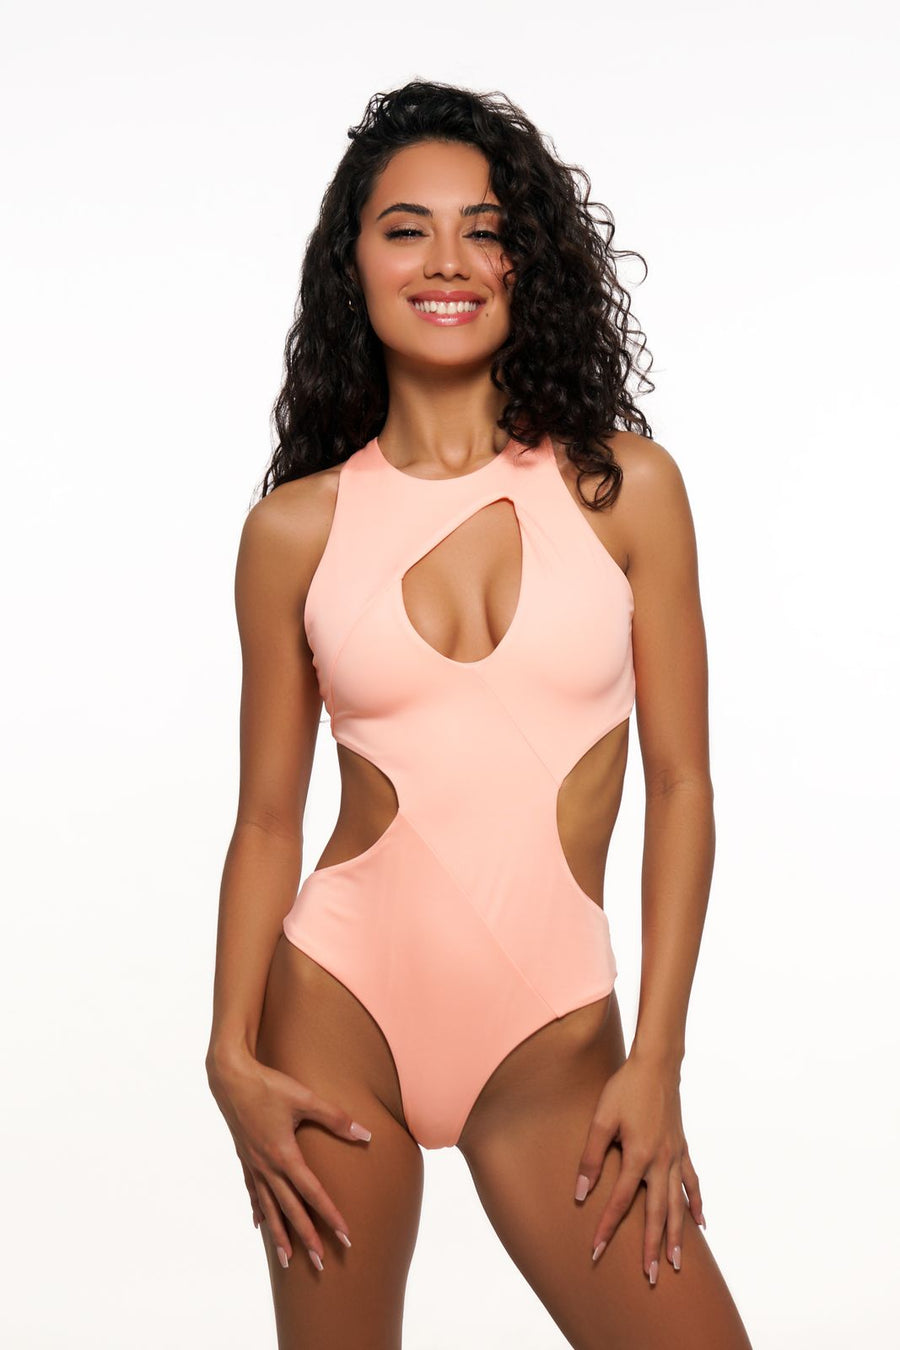 Simple Guidelines That You Should Follow When Choosing Swimsuit